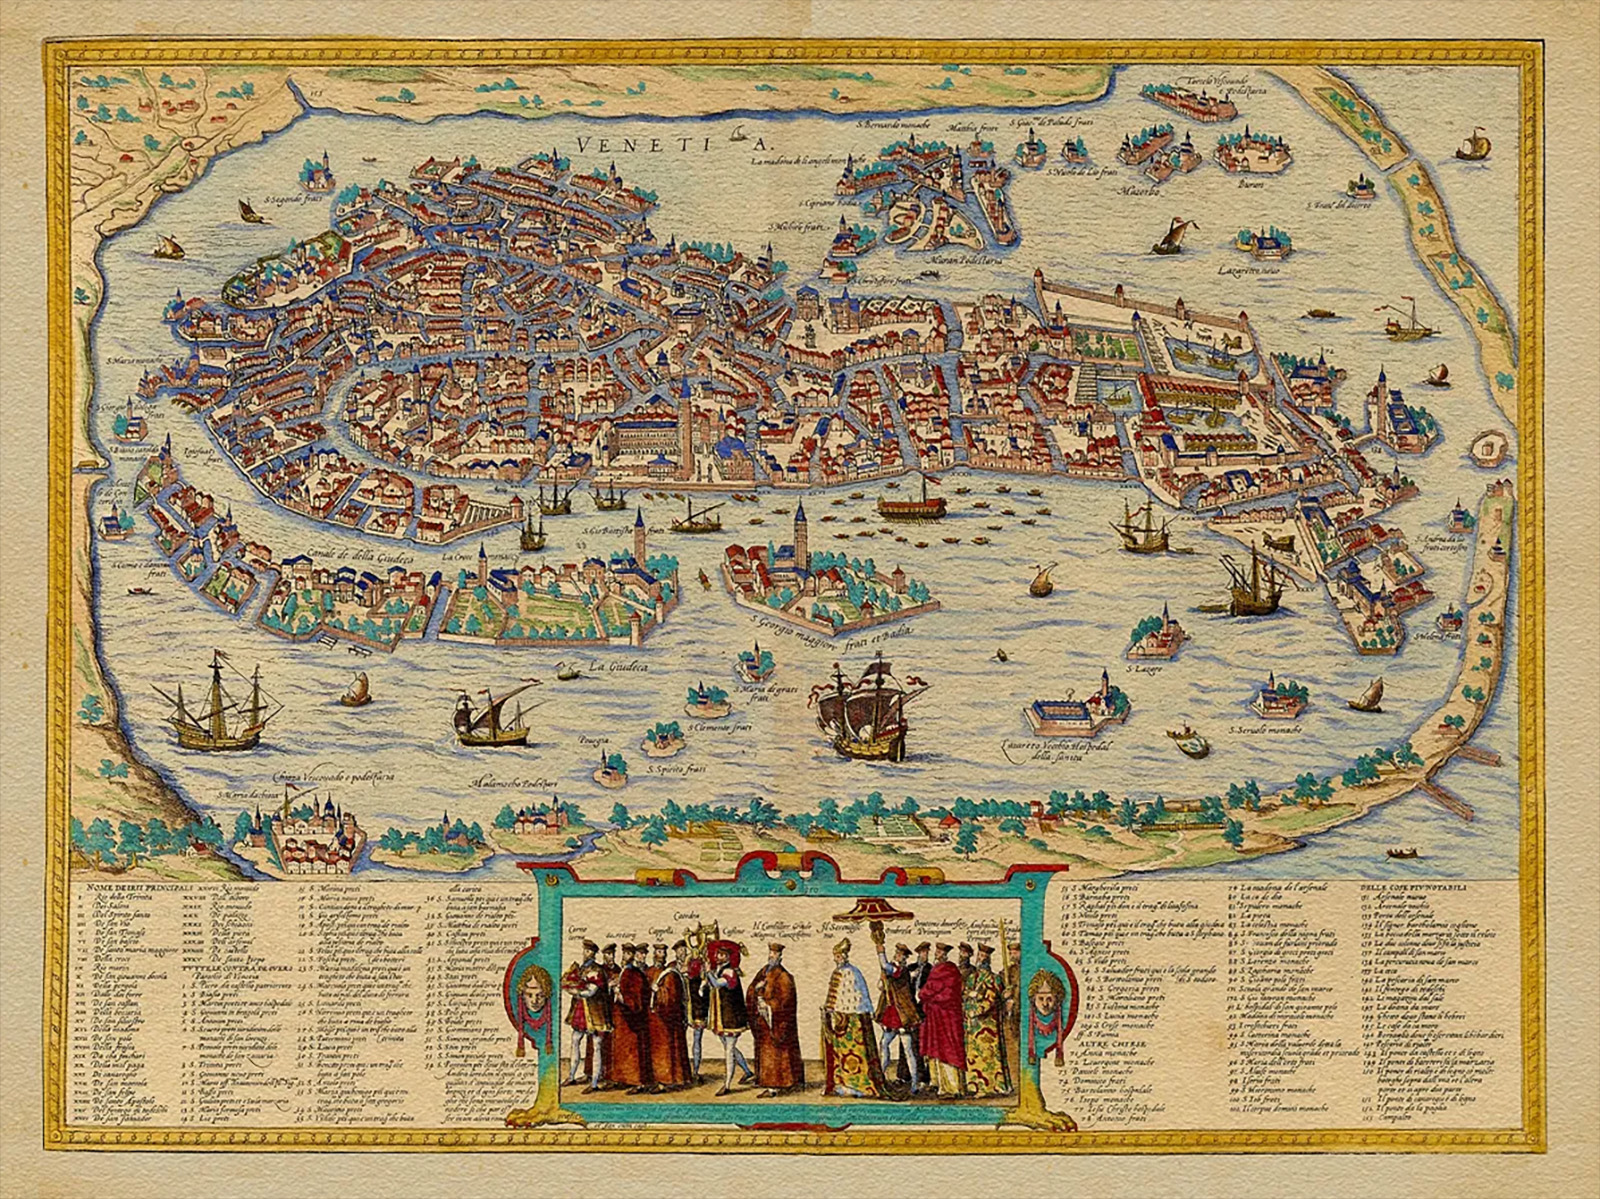 An old map illustrating a bird's eye view of Venice with its winding streets and canals.